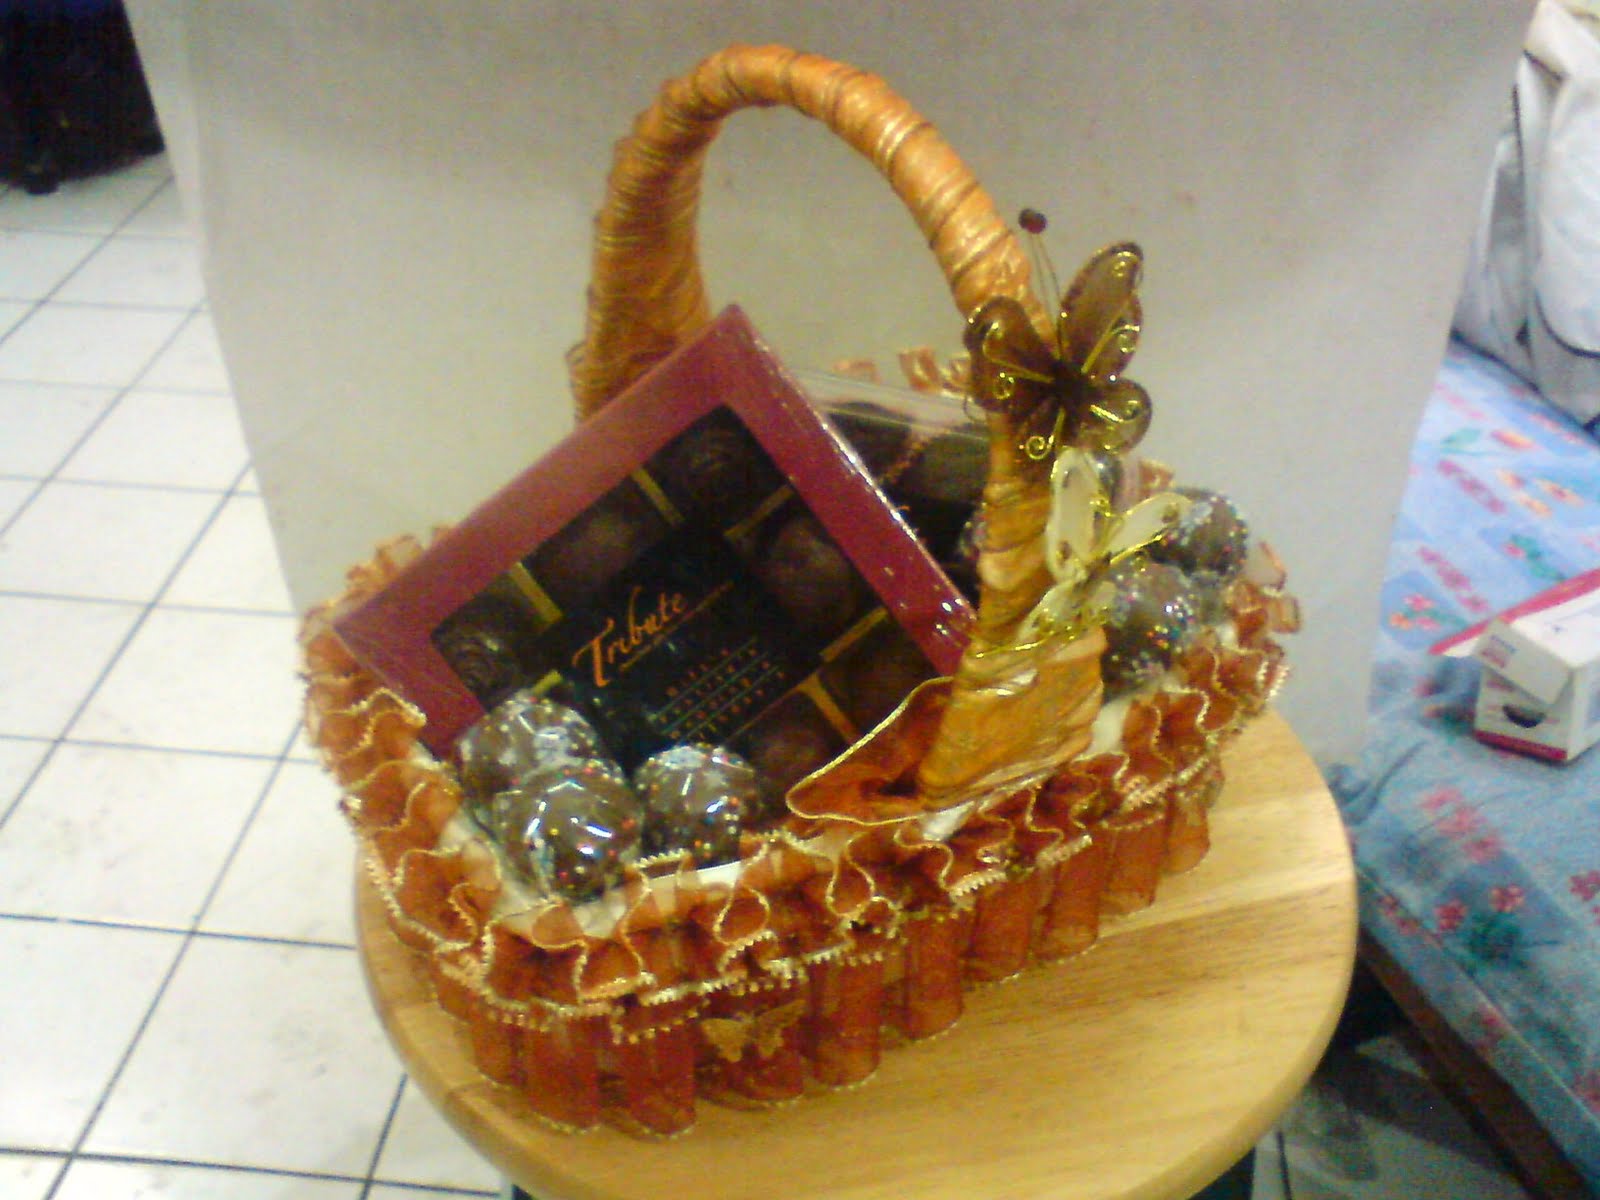 Tribute -Chocolate gift for your special day-: October 2010